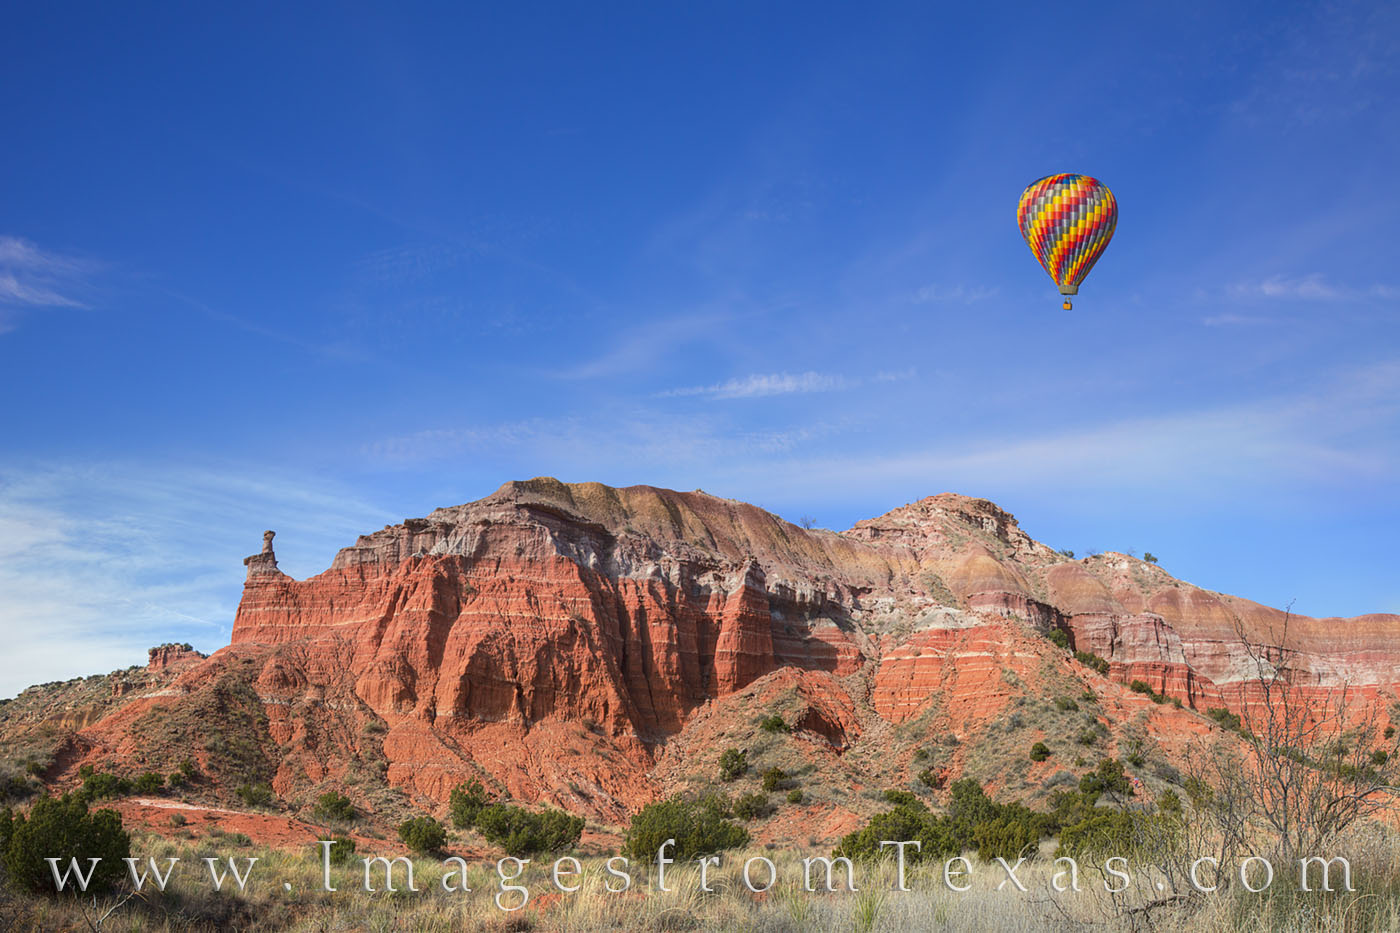 A hot air balloon floats over the red sandstone and hoodoos of Palo Duro Canyon in the Texas panhandle. This image was made on...